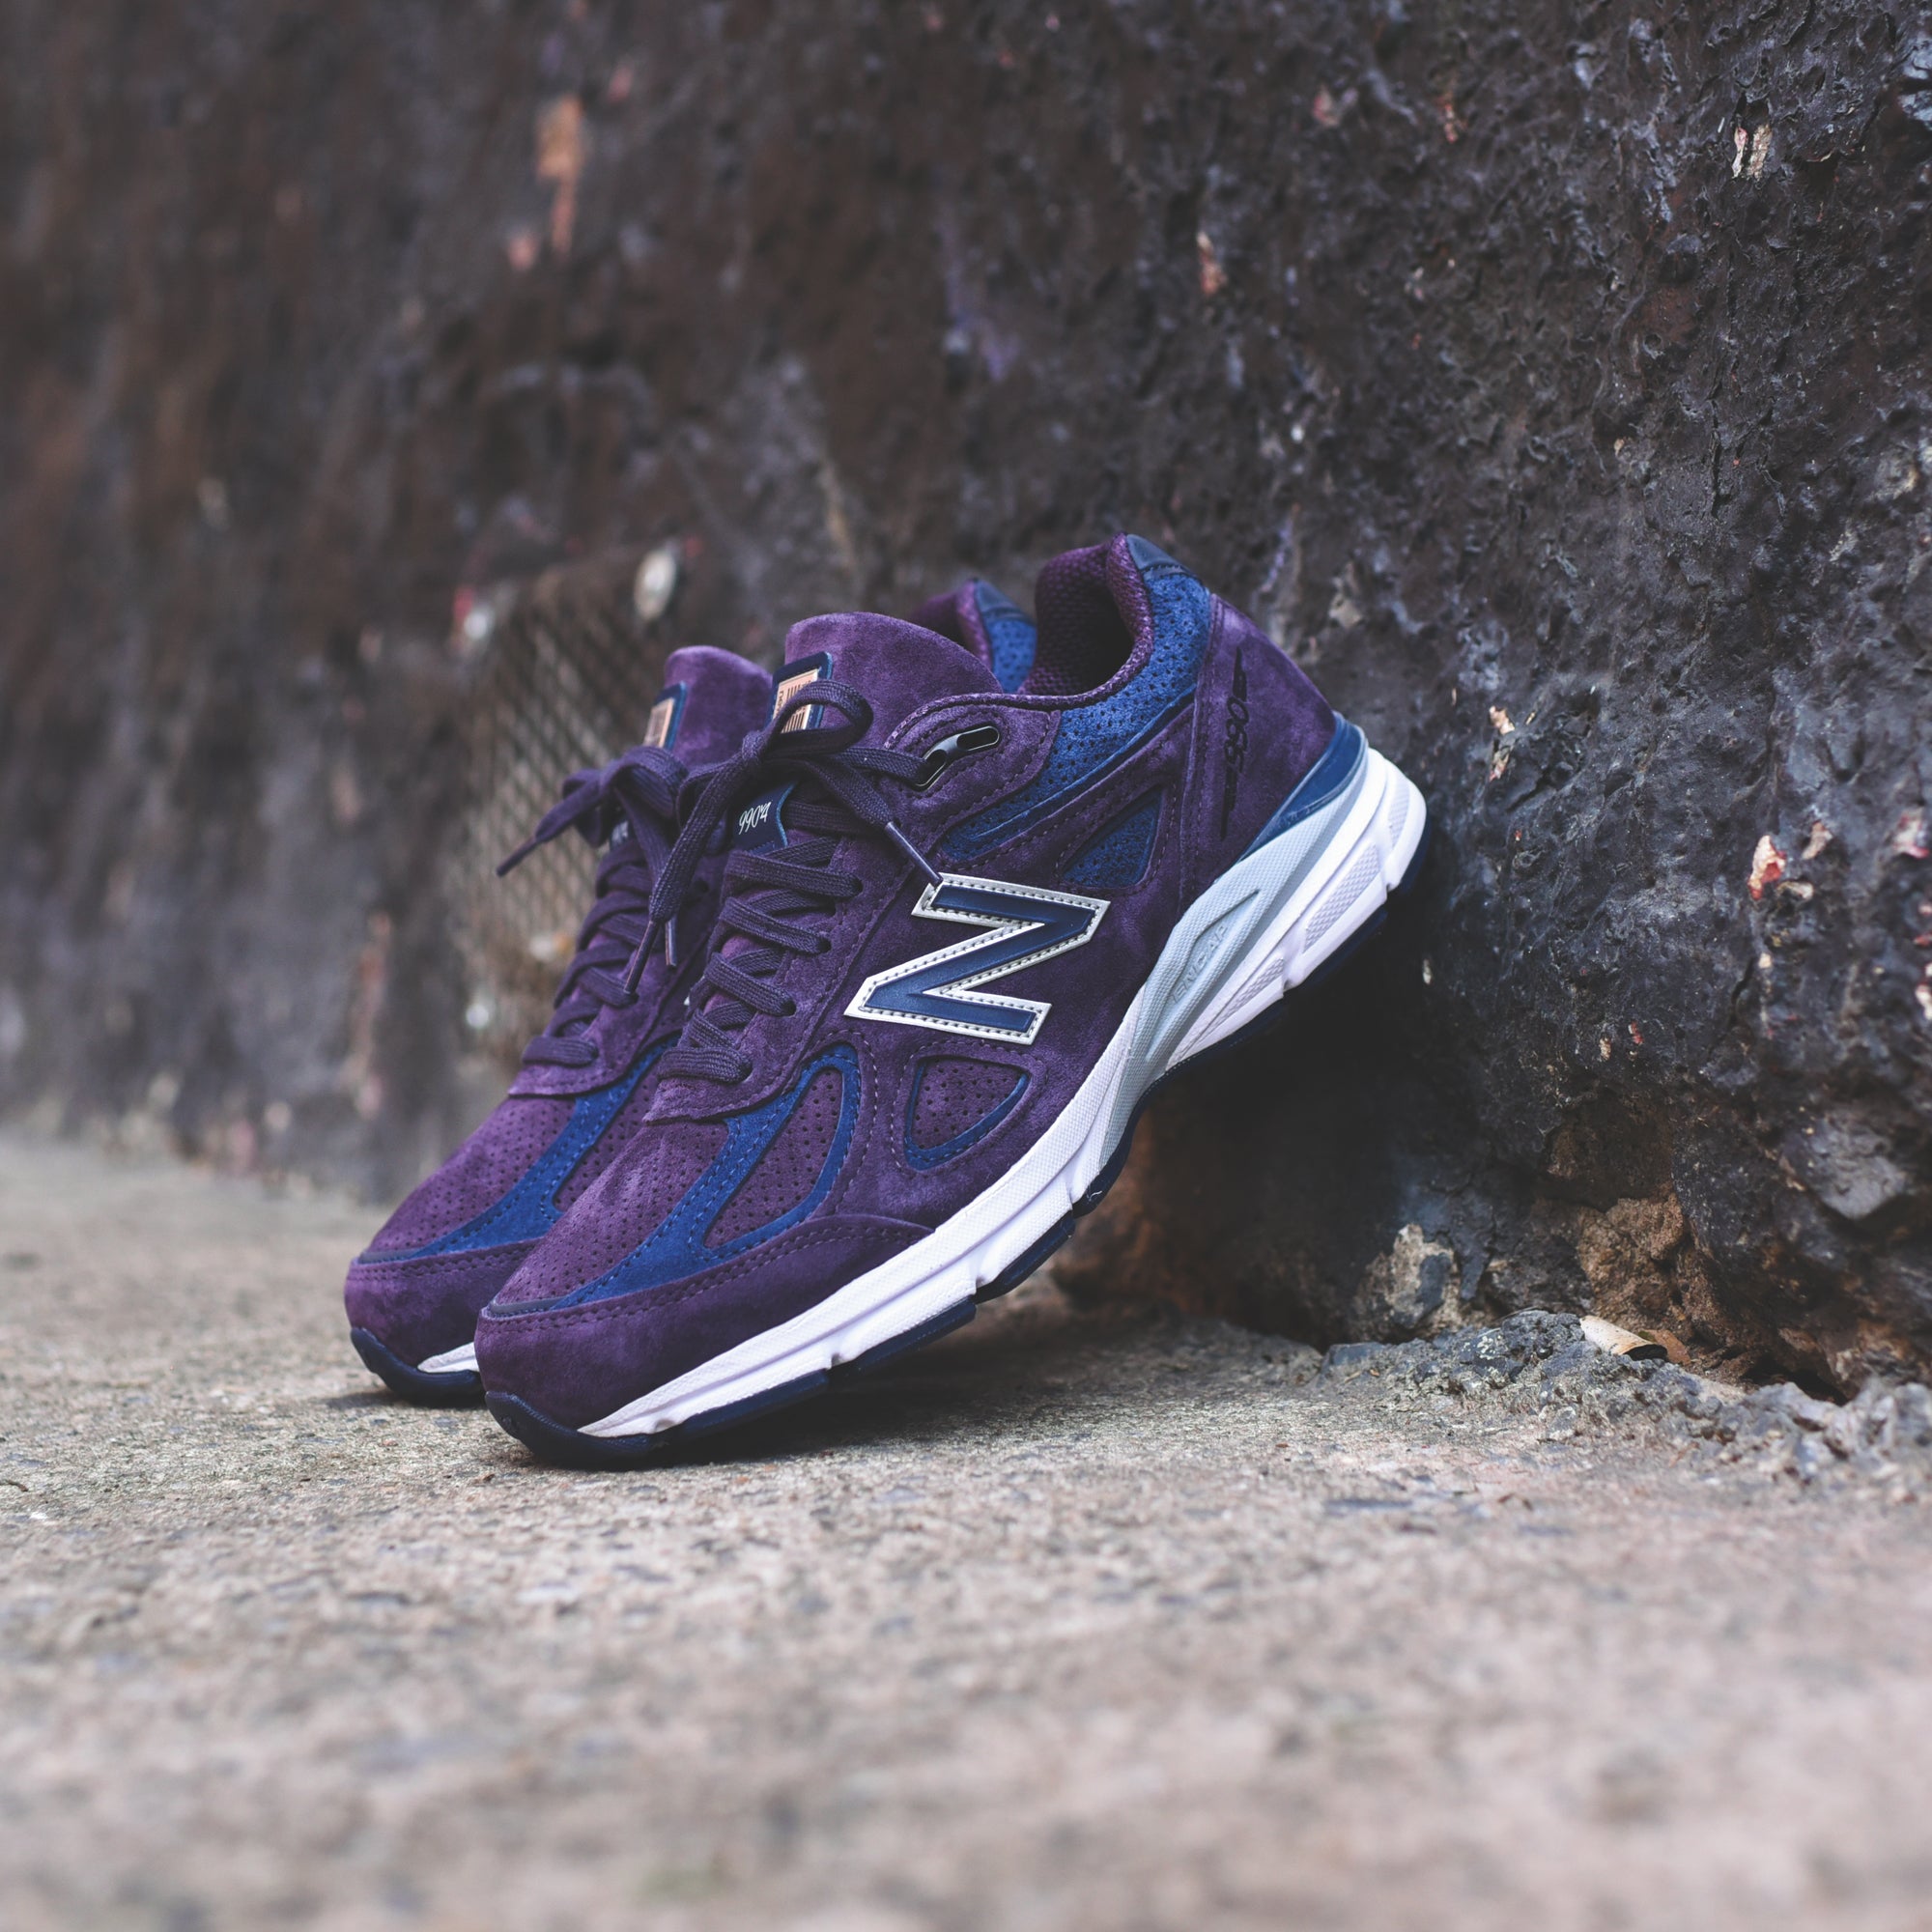 New Balance Made in US 990v4 